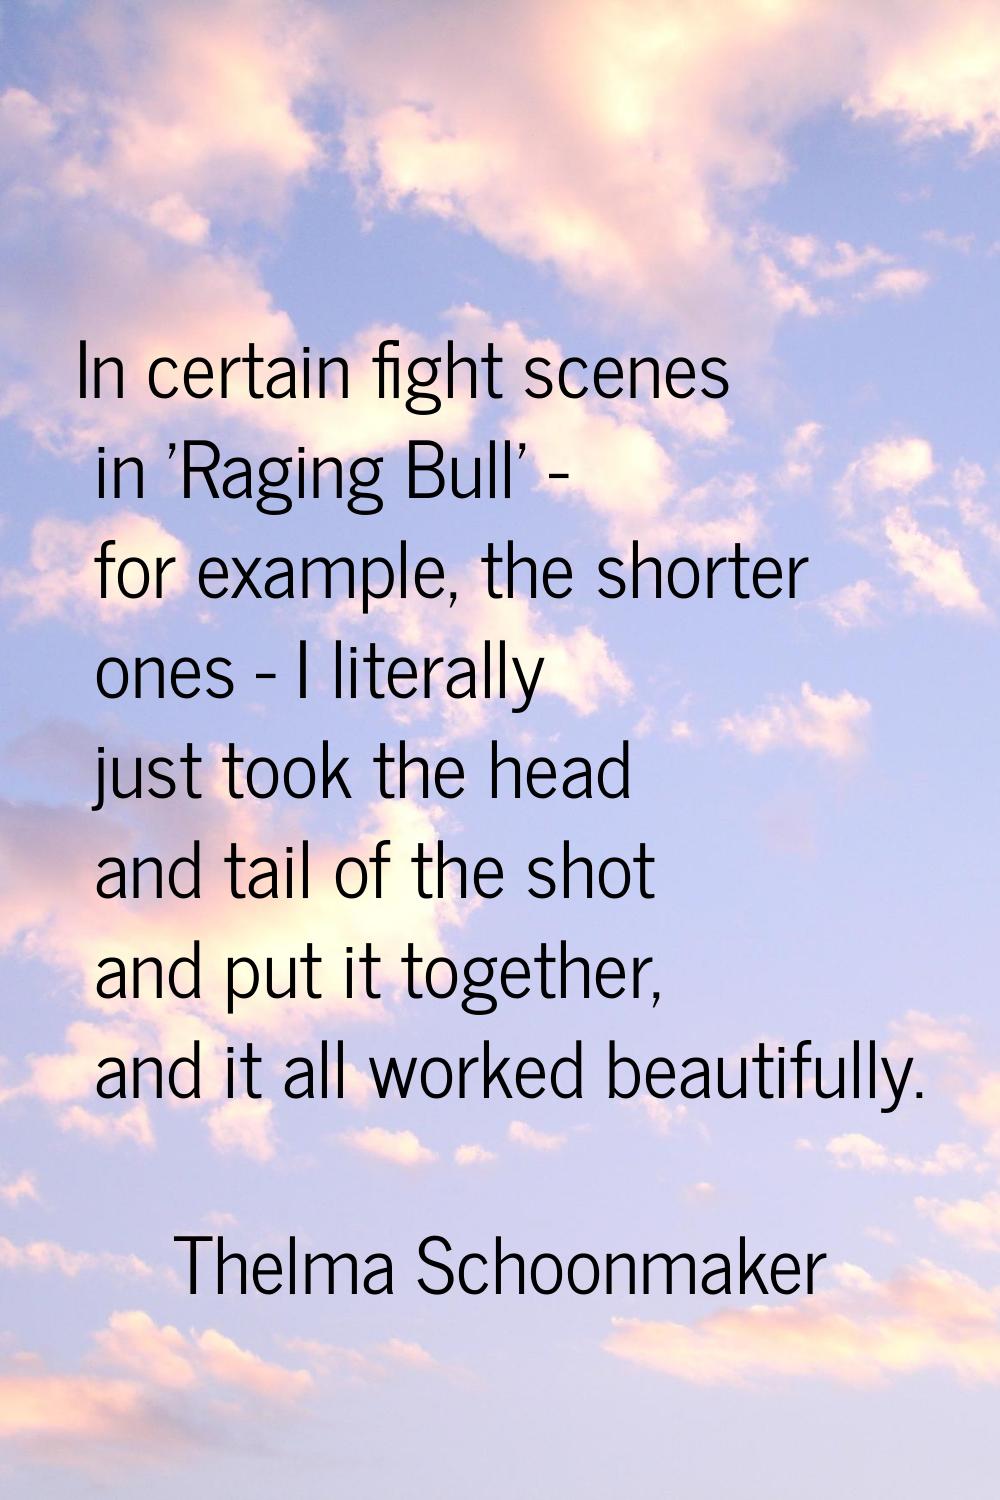 In certain fight scenes in 'Raging Bull' - for example, the shorter ones - I literally just took th